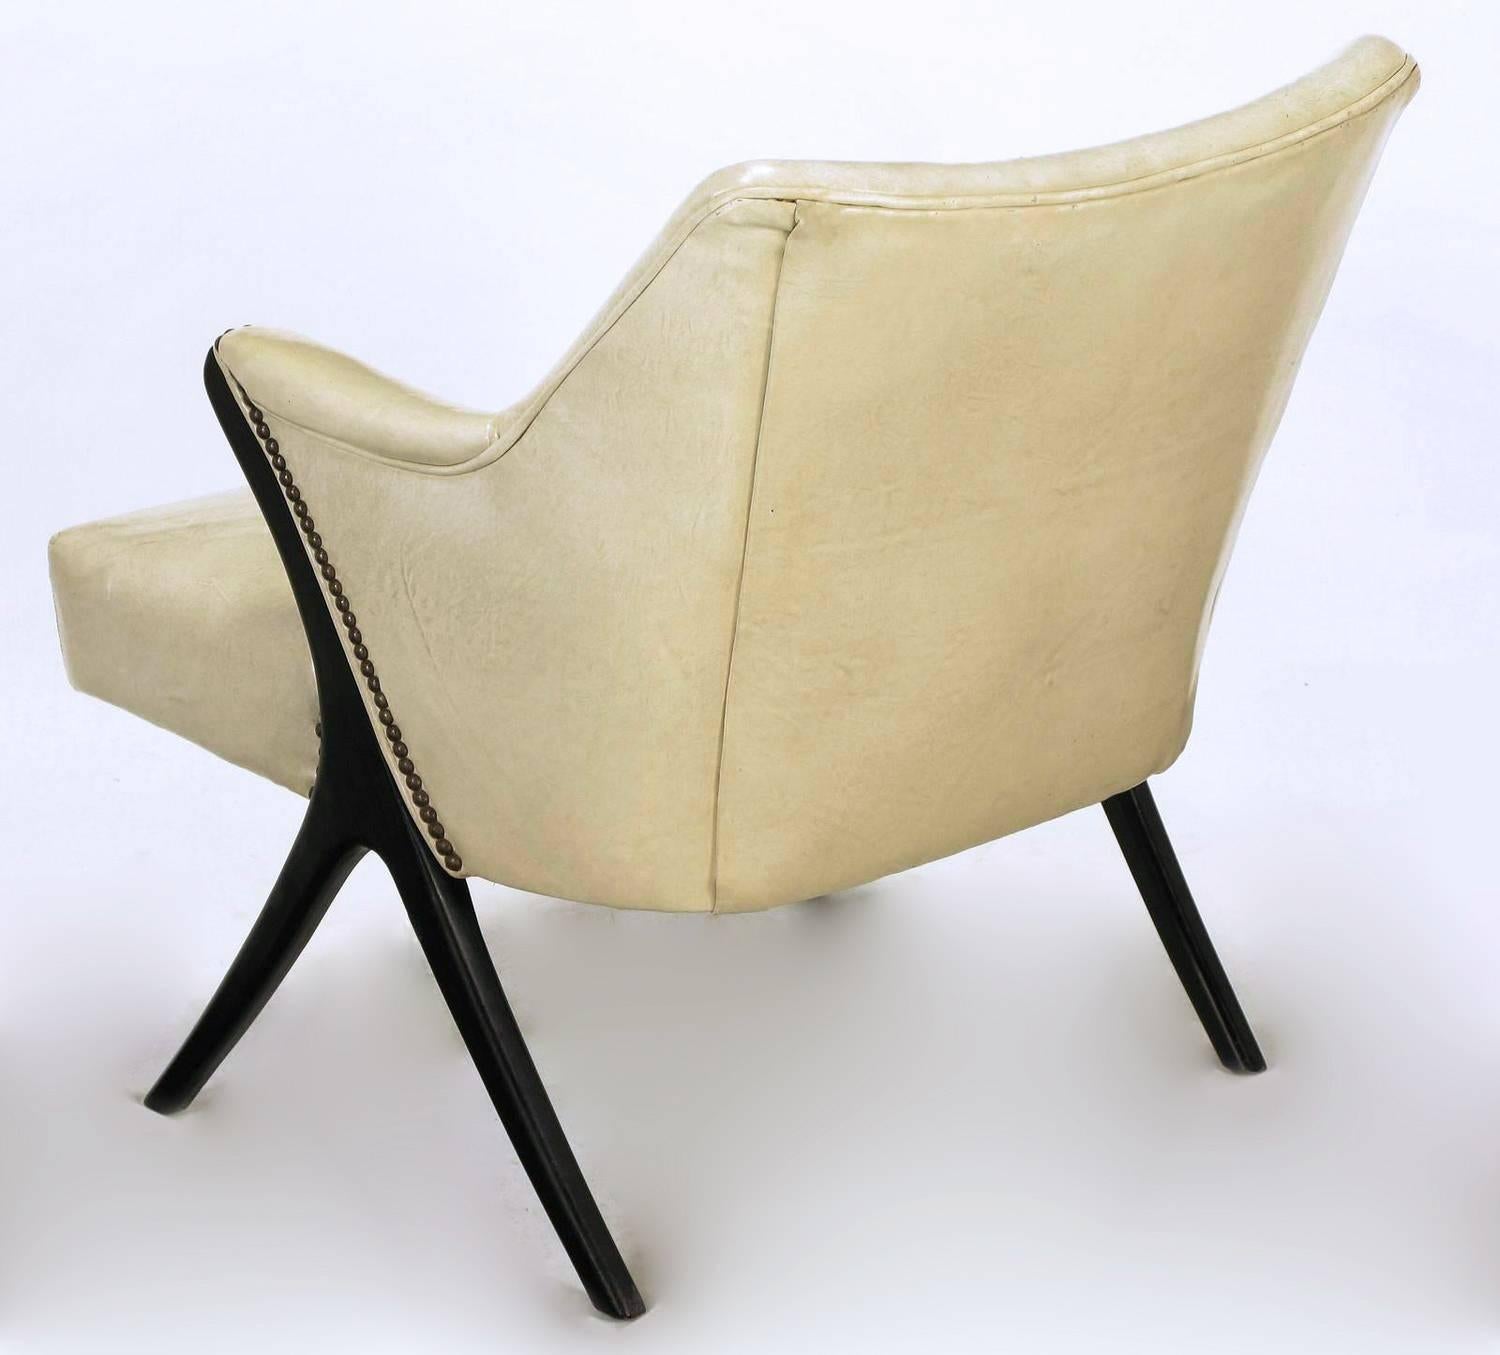 Brass Pair of 1940s Modernist Club Chairs in Original Bone Glazed Leather For Sale